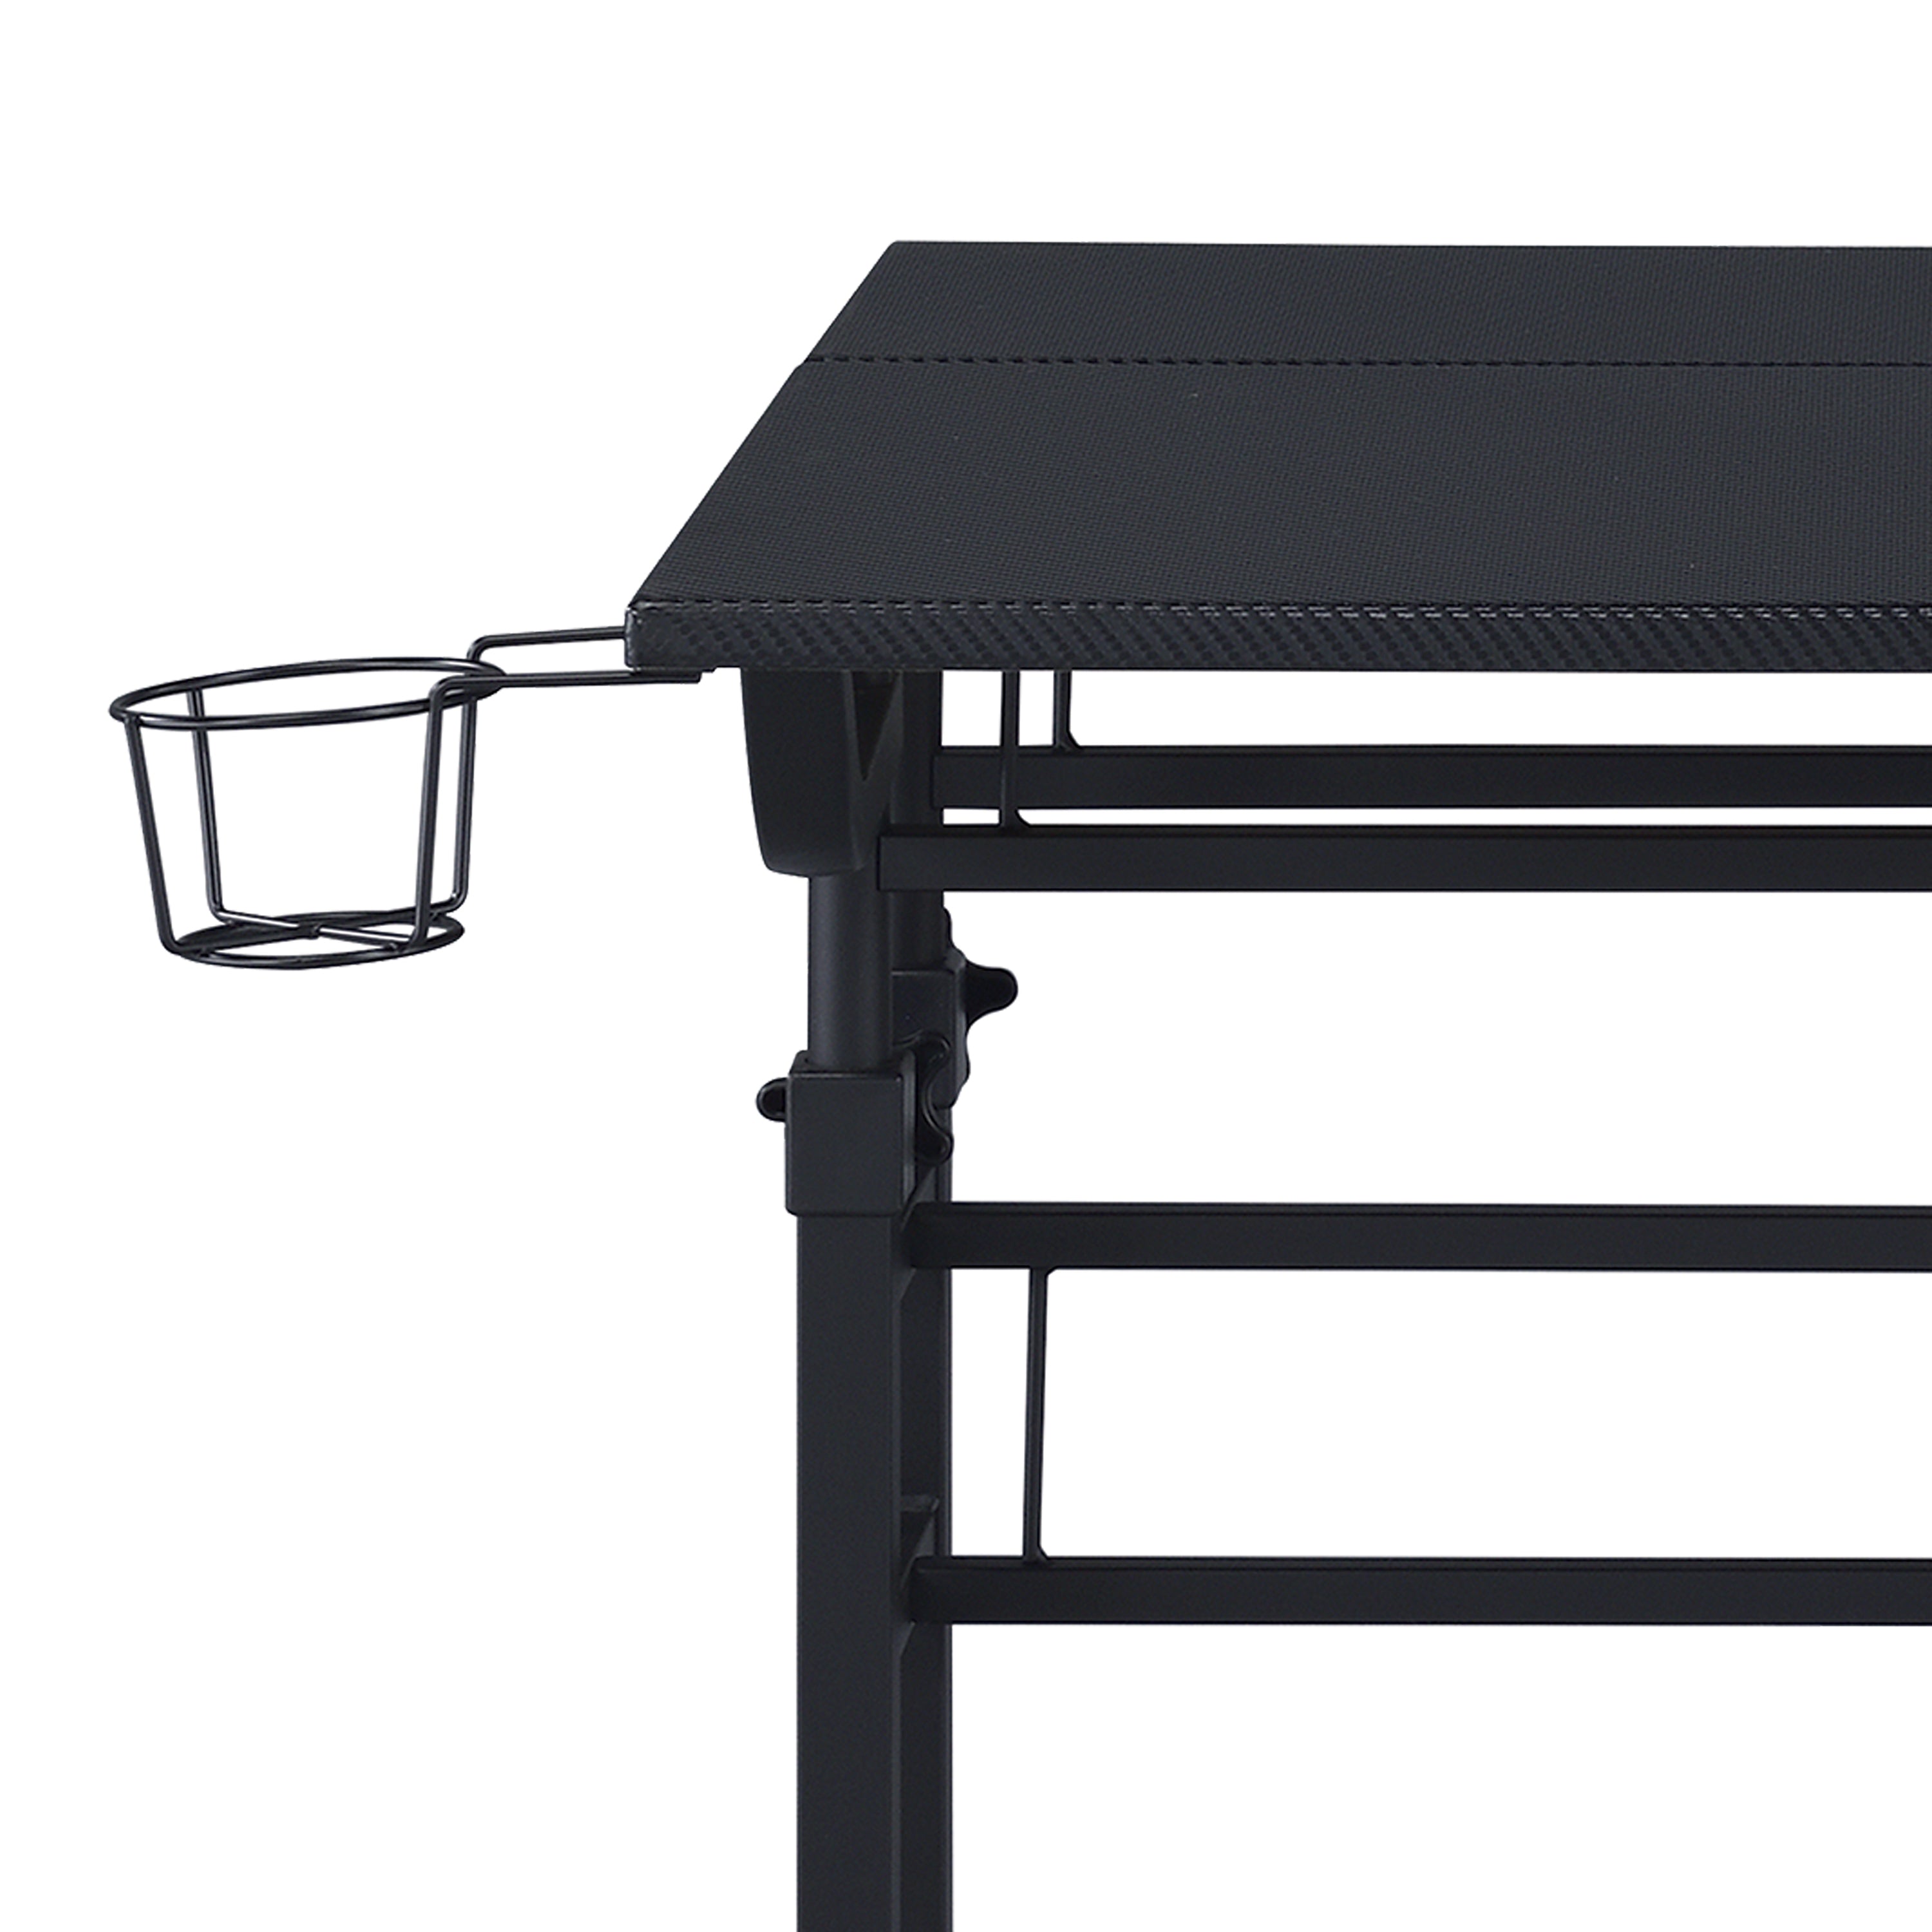 Techni Mobili Rolling Writing Desk with Height Adjustable Desktop and Moveable Shelf (Black)